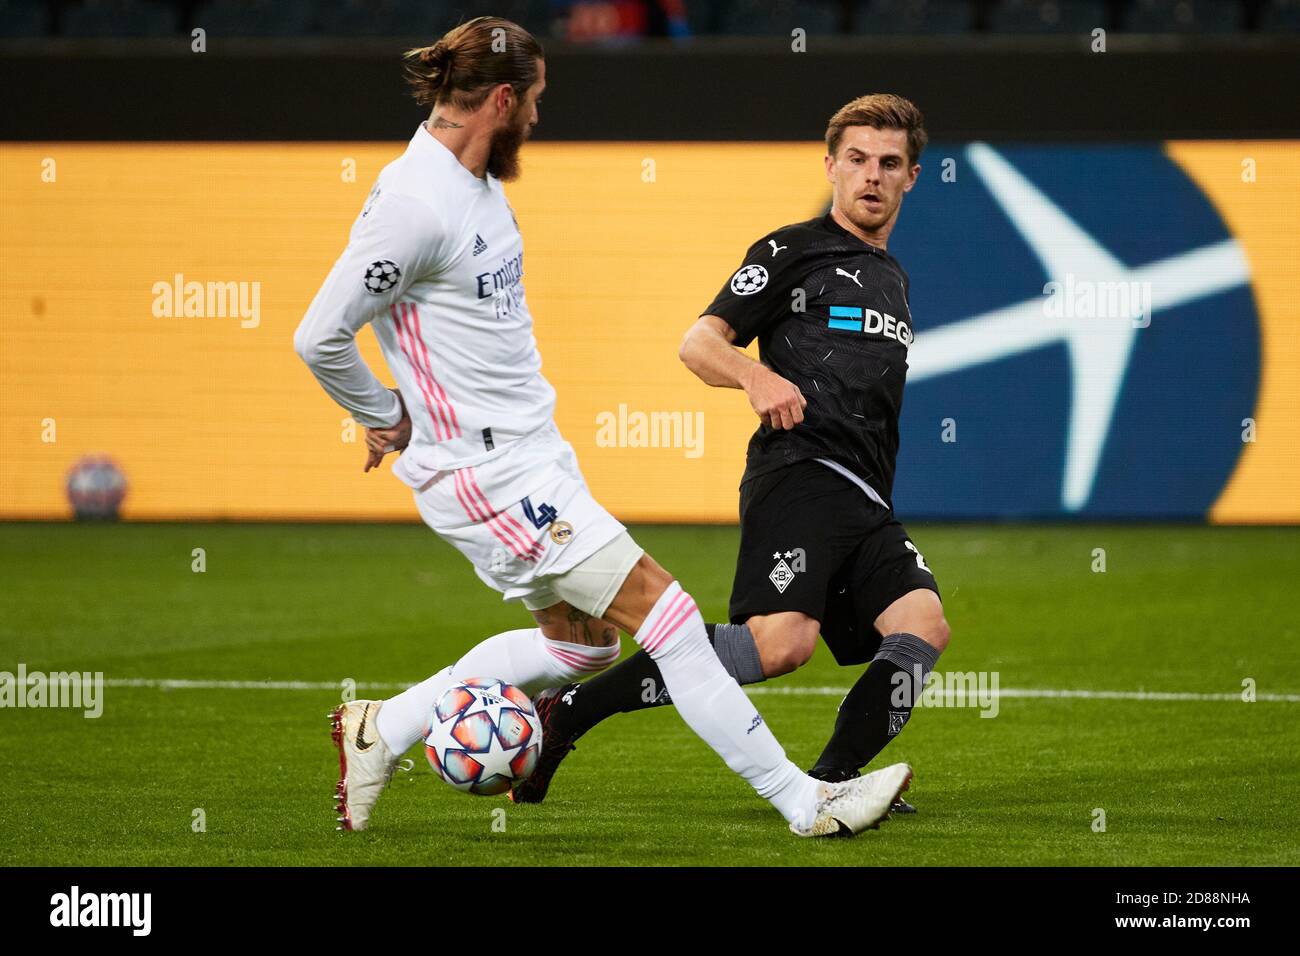 Monchengladbach, Germany. 27th Oct, 2020. <b during the UEFA Champions League match between Borussia Monchengladbach and Real Madrid at Borussia-Park on October 27, 2020 in Monchengladbach, Spain. Credit: Dax Images/Alamy Live News Stock Photo